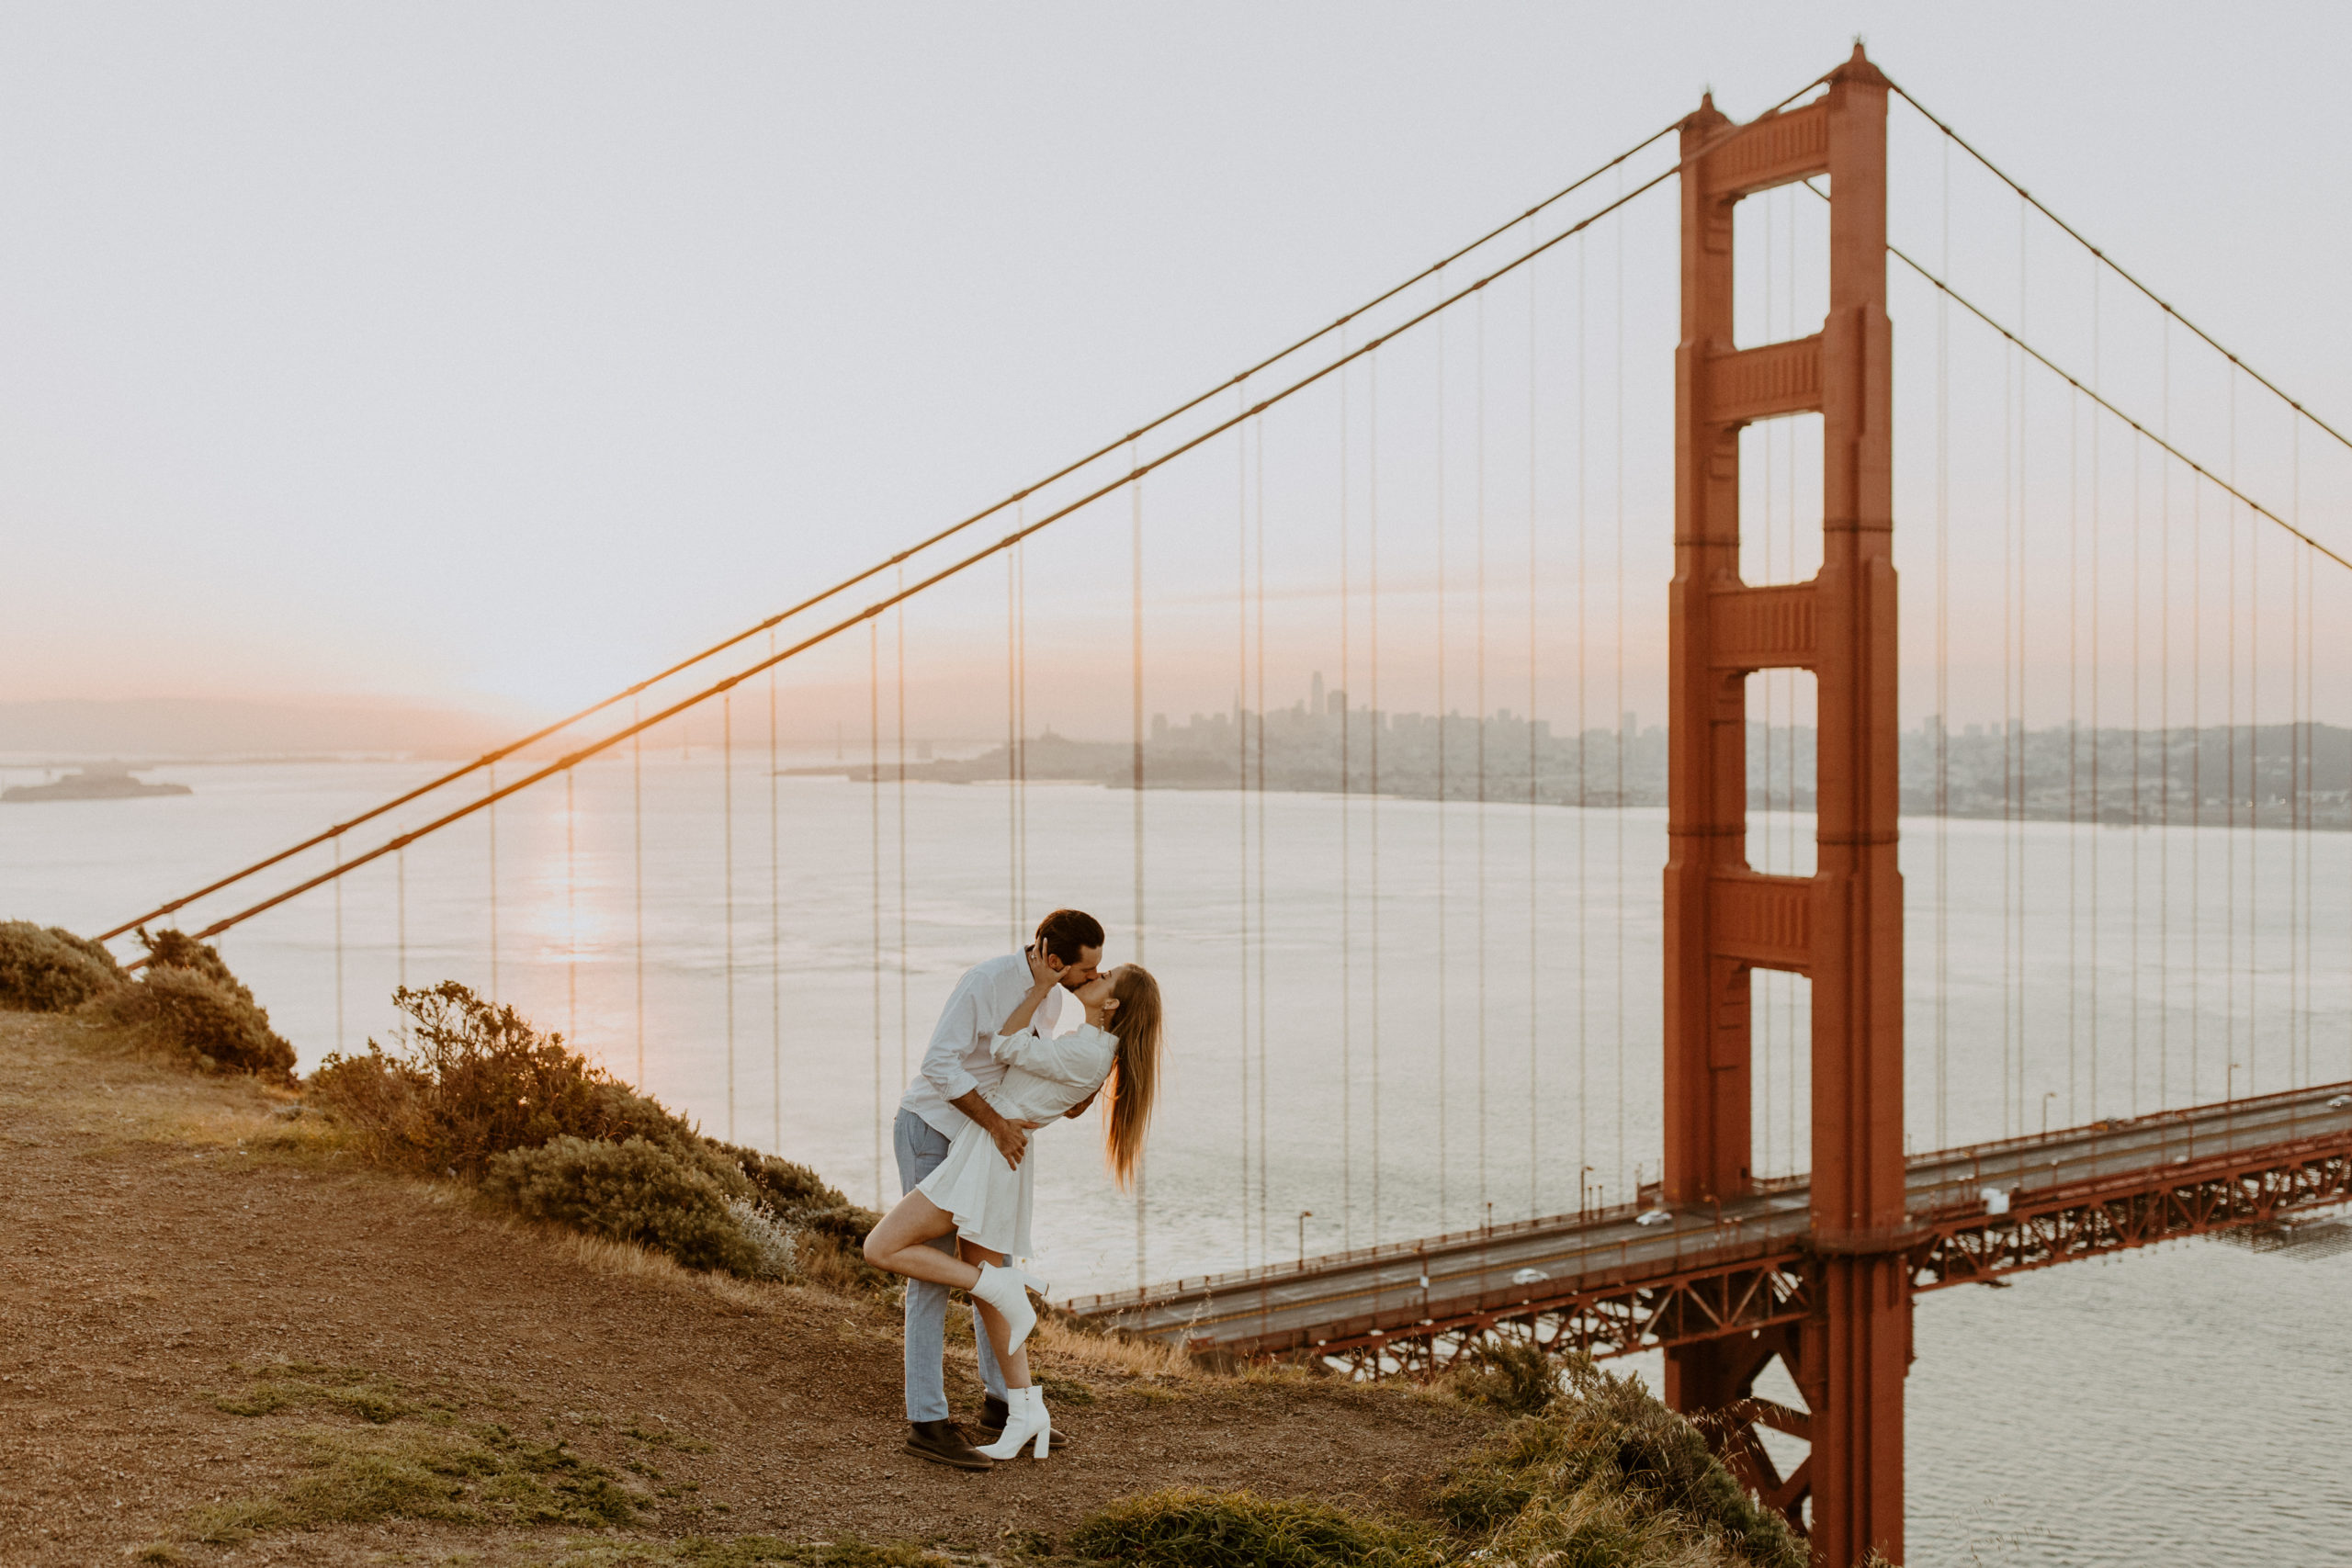 the couple hugging and kissing during the sunrise over the bridge